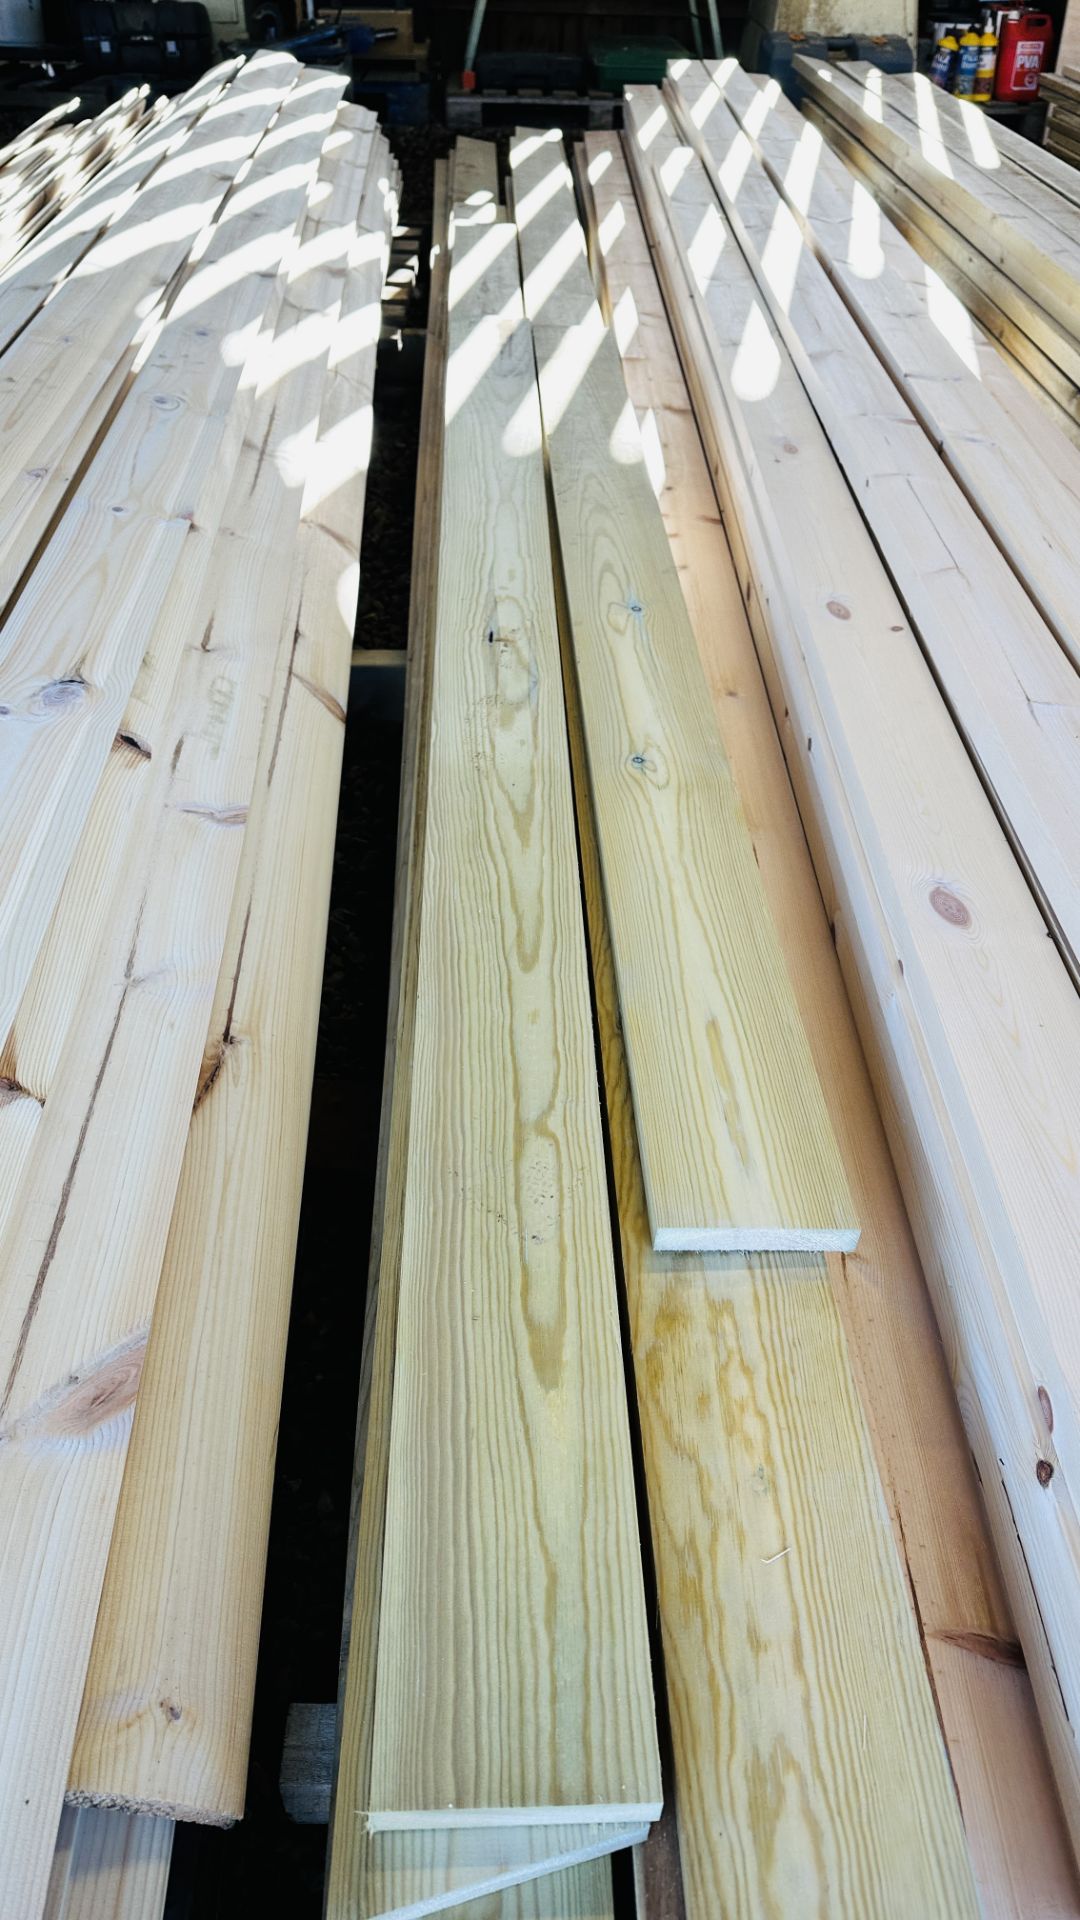 22 X 120MM X 20MM TANALISED BOARDING, MIXED LENGTHS, MAX 5 METRES. - Image 5 of 5